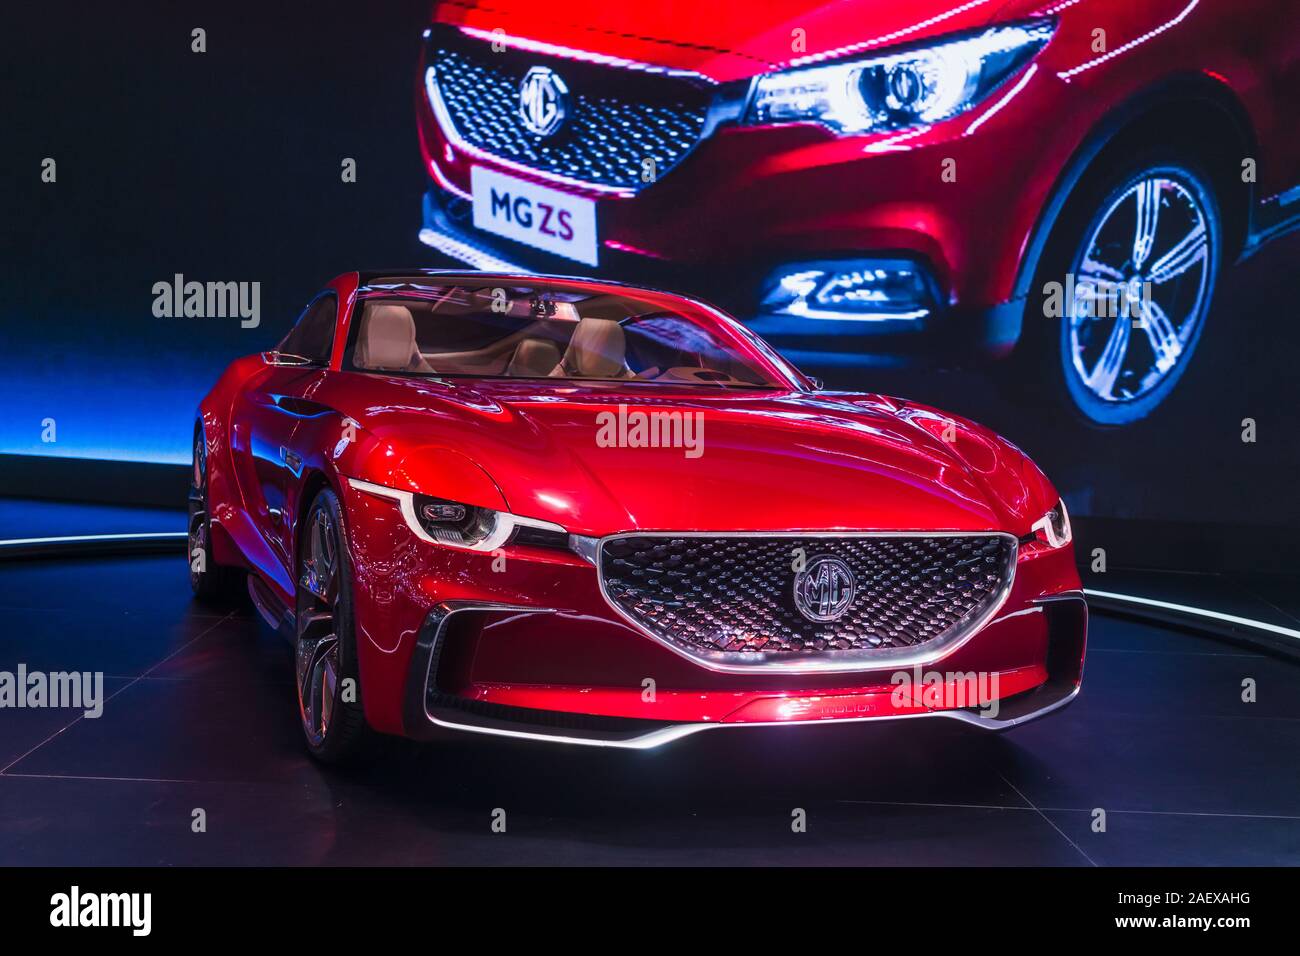 https://c8.alamy.com/comp/2AEXAHG/bangkok-thailand-decemeber-11-2019-mg-motor-display-display-red-color-mg-zs-the-mg-zs-is-a-subcompact-crossover-suv-produced-by-the-chinese-owned-2AEXAHG.jpg